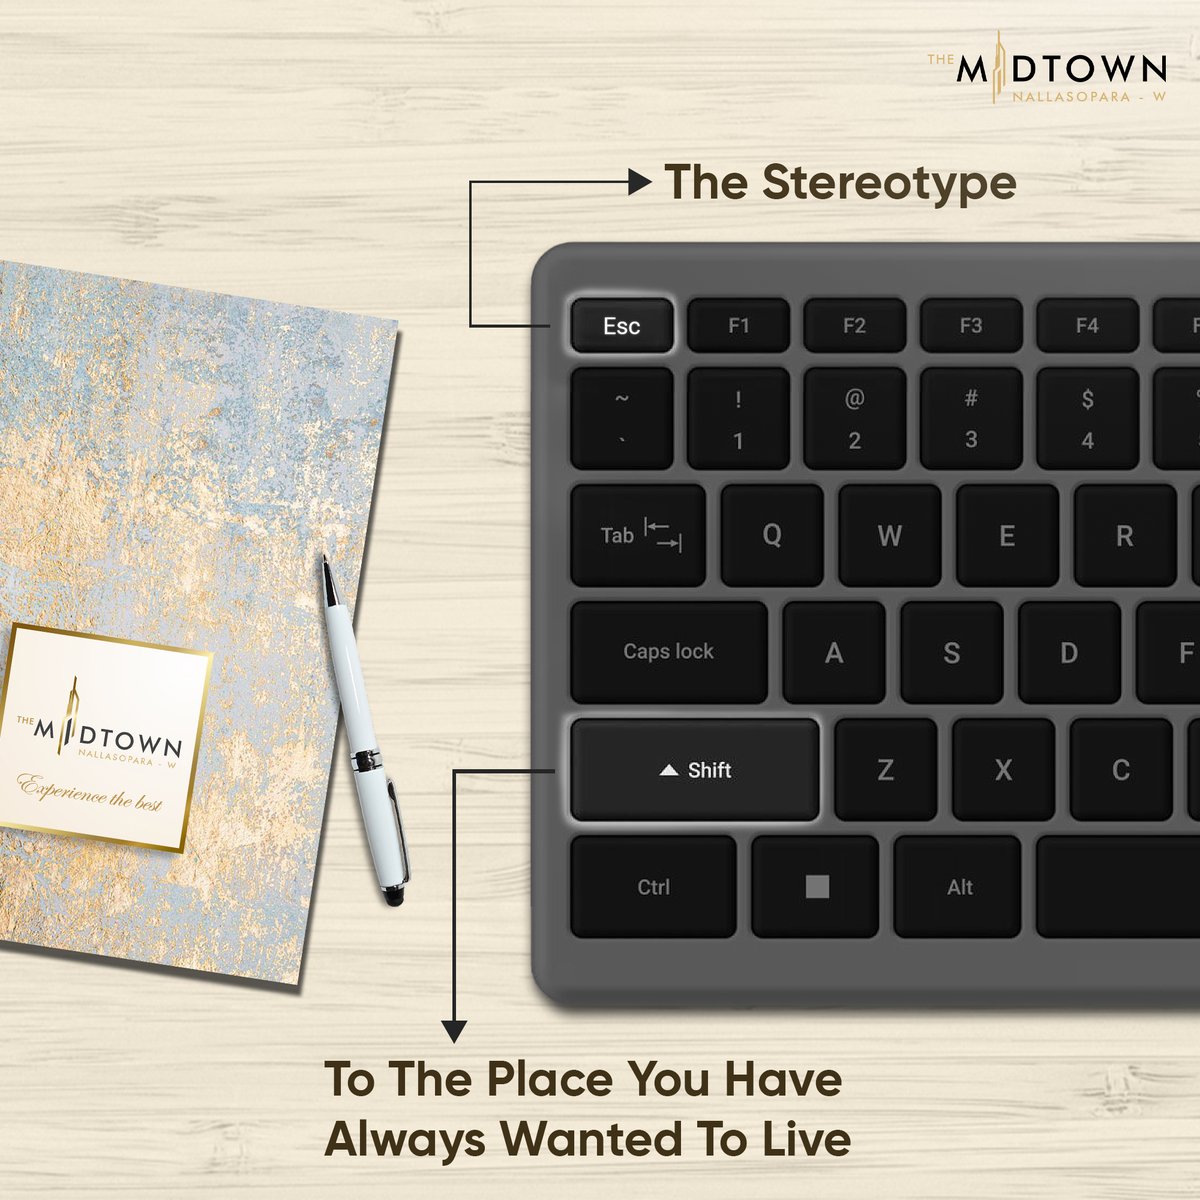 Make Midtown your new home where you can be truly yourself. 

#TheMidtown #WeAreTheMidtown #RealEstate #RealEstateDevelopers #RealEstateTeam #PrimeLocation #ResidentialProjects #RealEstateExperts #PropertyInvestment #Shift #Nallasopara #Virar #Mumbai #India